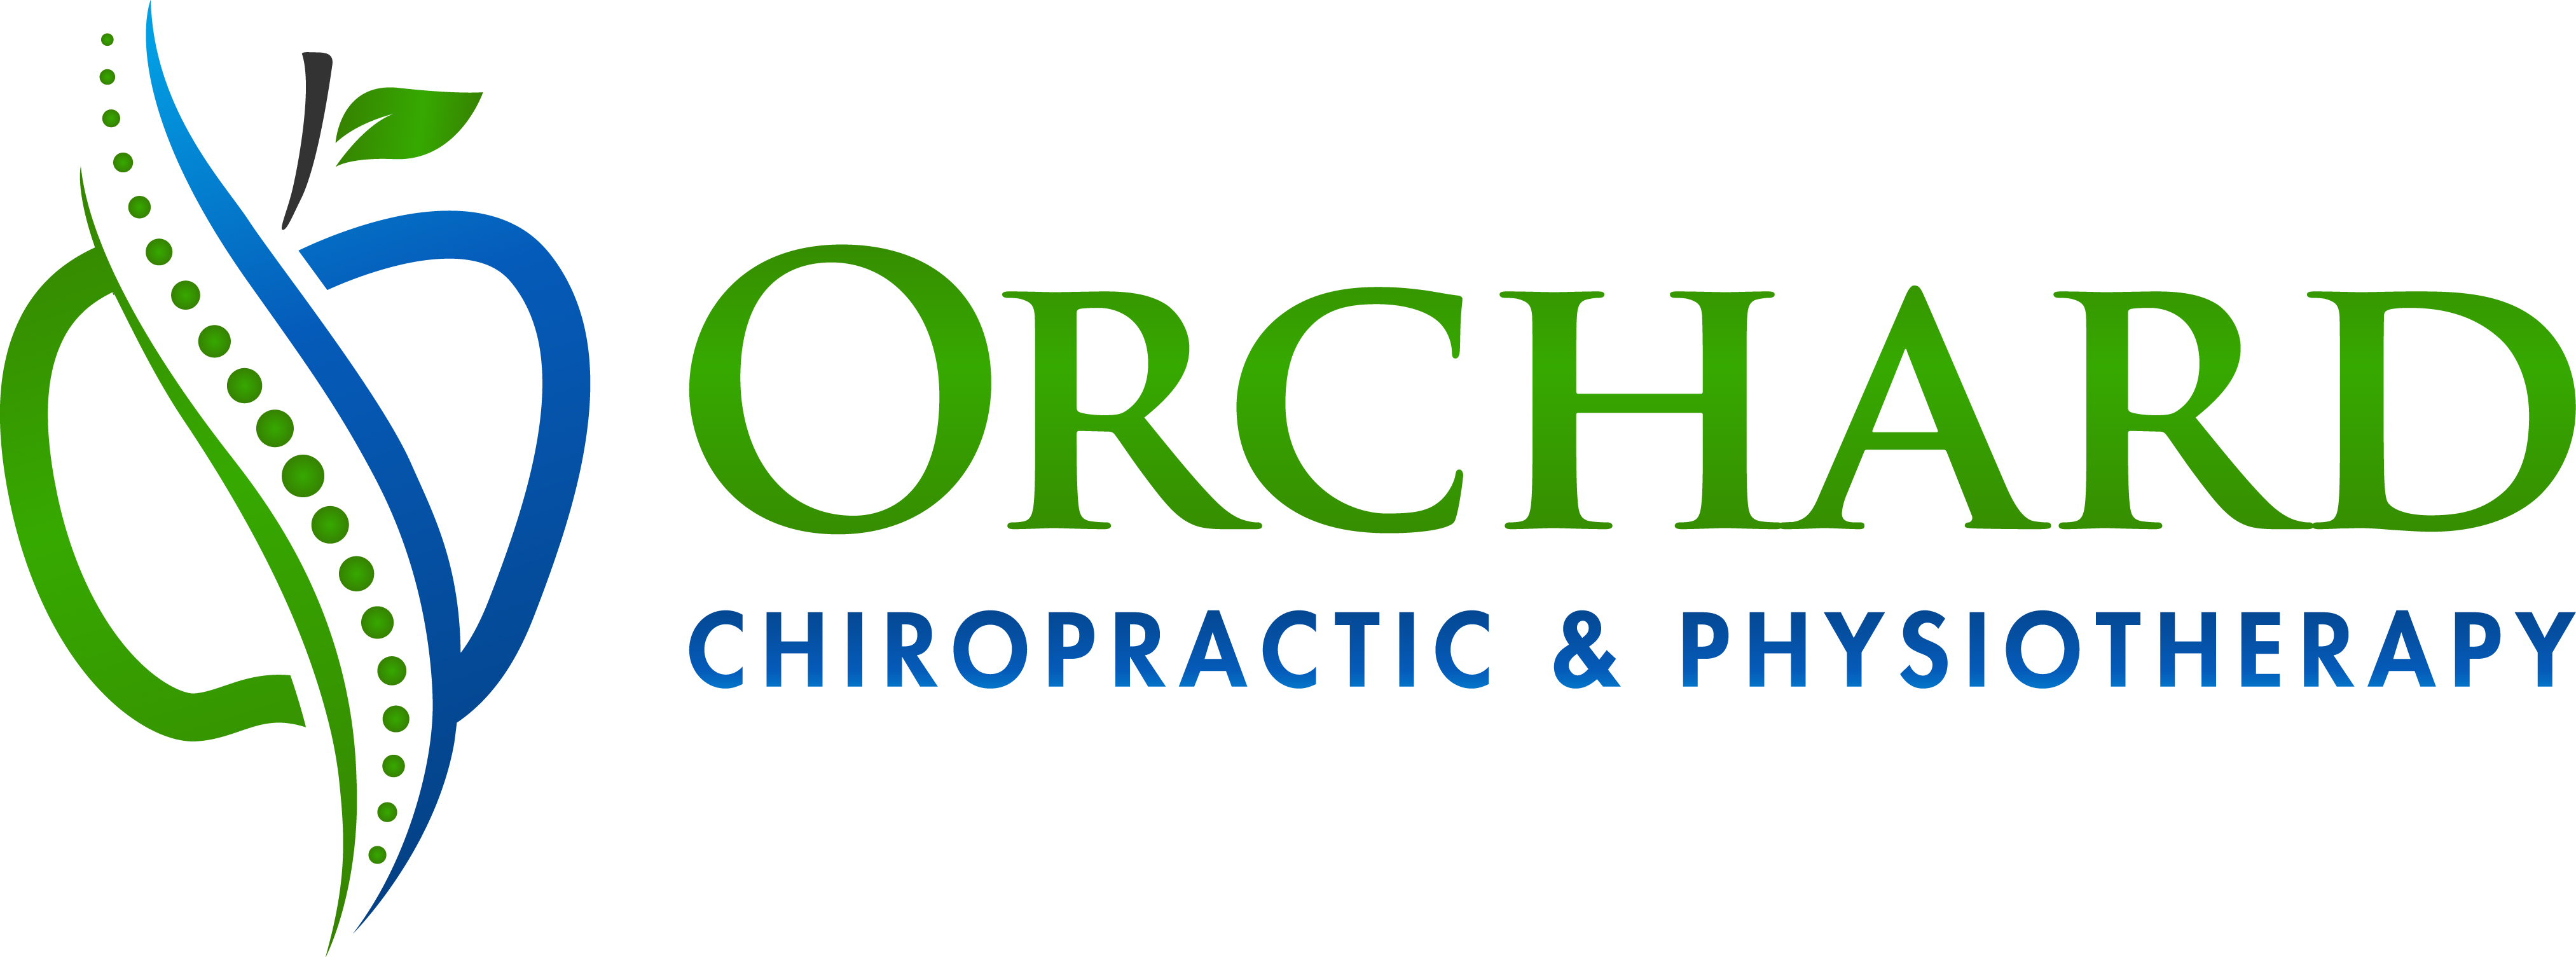 Orchard Chiropractic and Physiotherapy  Physiotherapy Association of  British Columbia